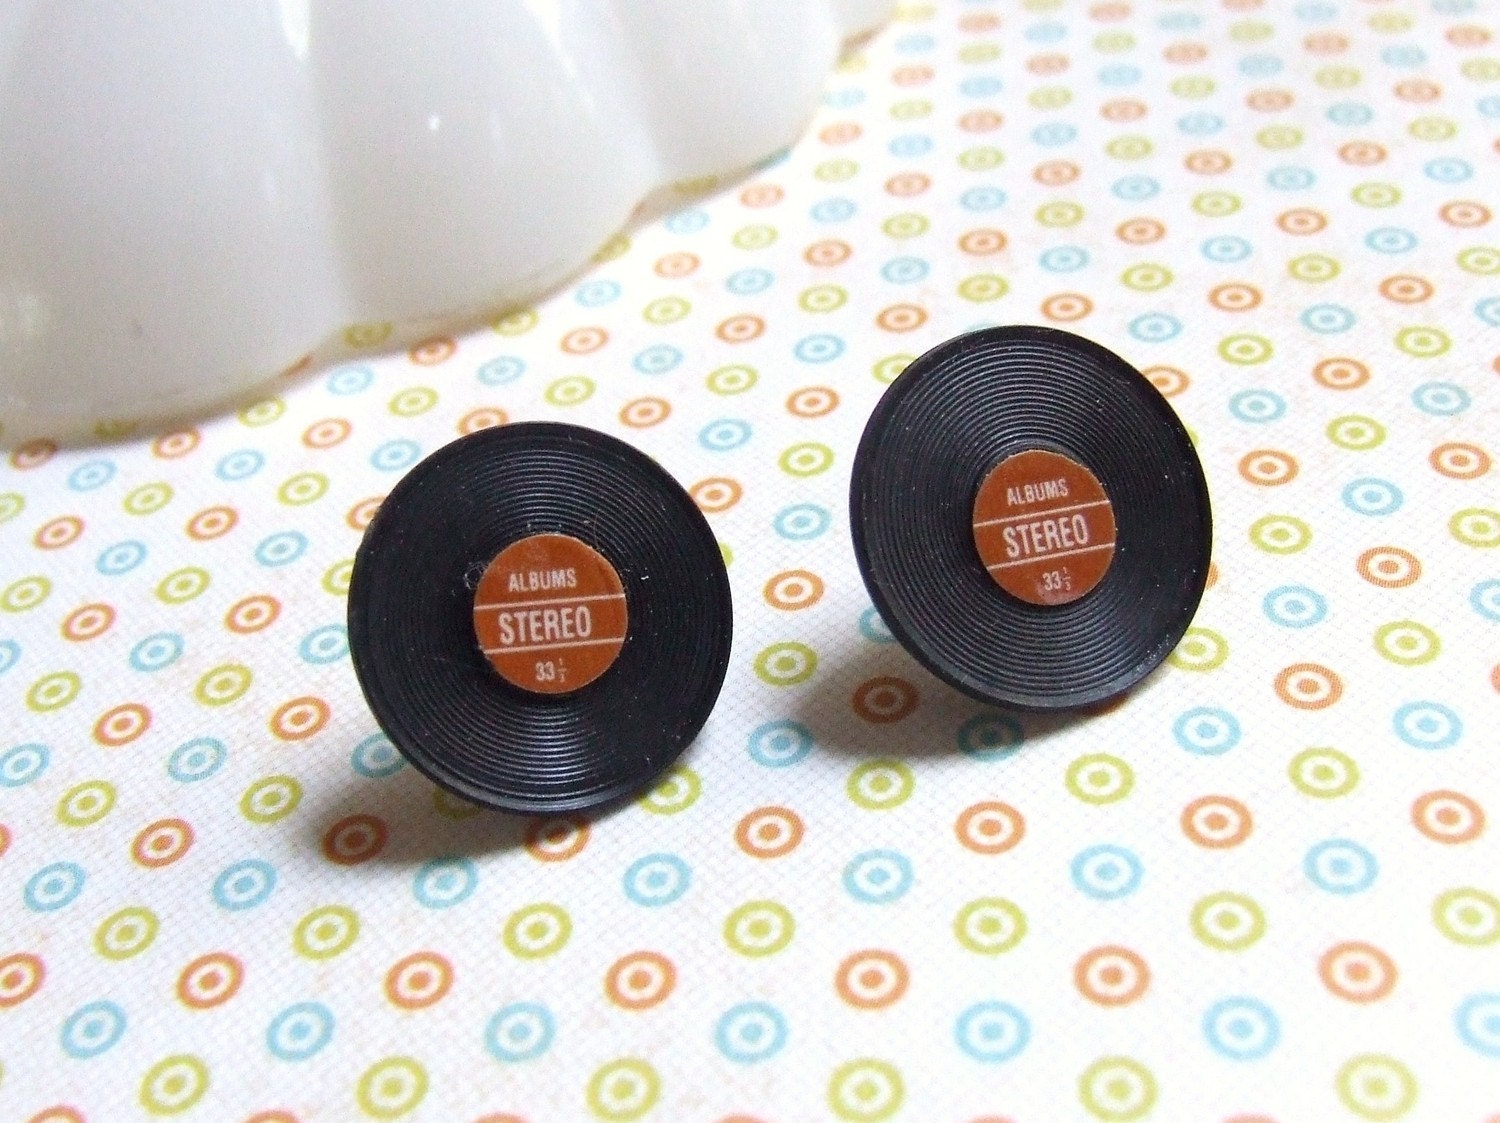 You Spin Me Round - Red Black - Miniature Vintage Record Album - Fun Plastic - Hypoallergenic Post Stud Earrings